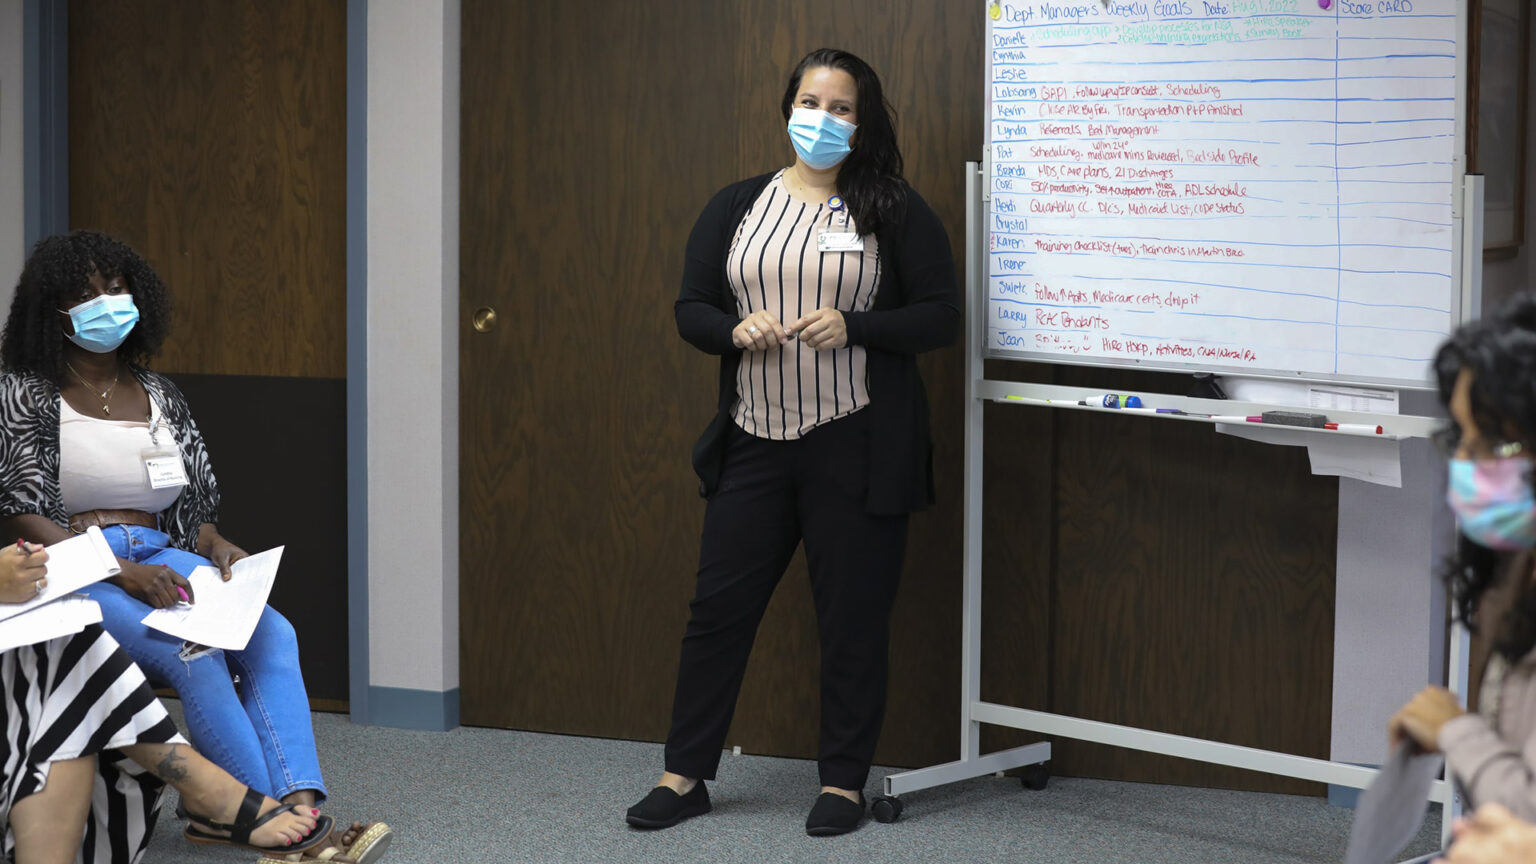 Danielle Sigler stands next to a whiteboard listing staff responsibilities, with colleagues seated on other side and wood-paneled doors in the background.